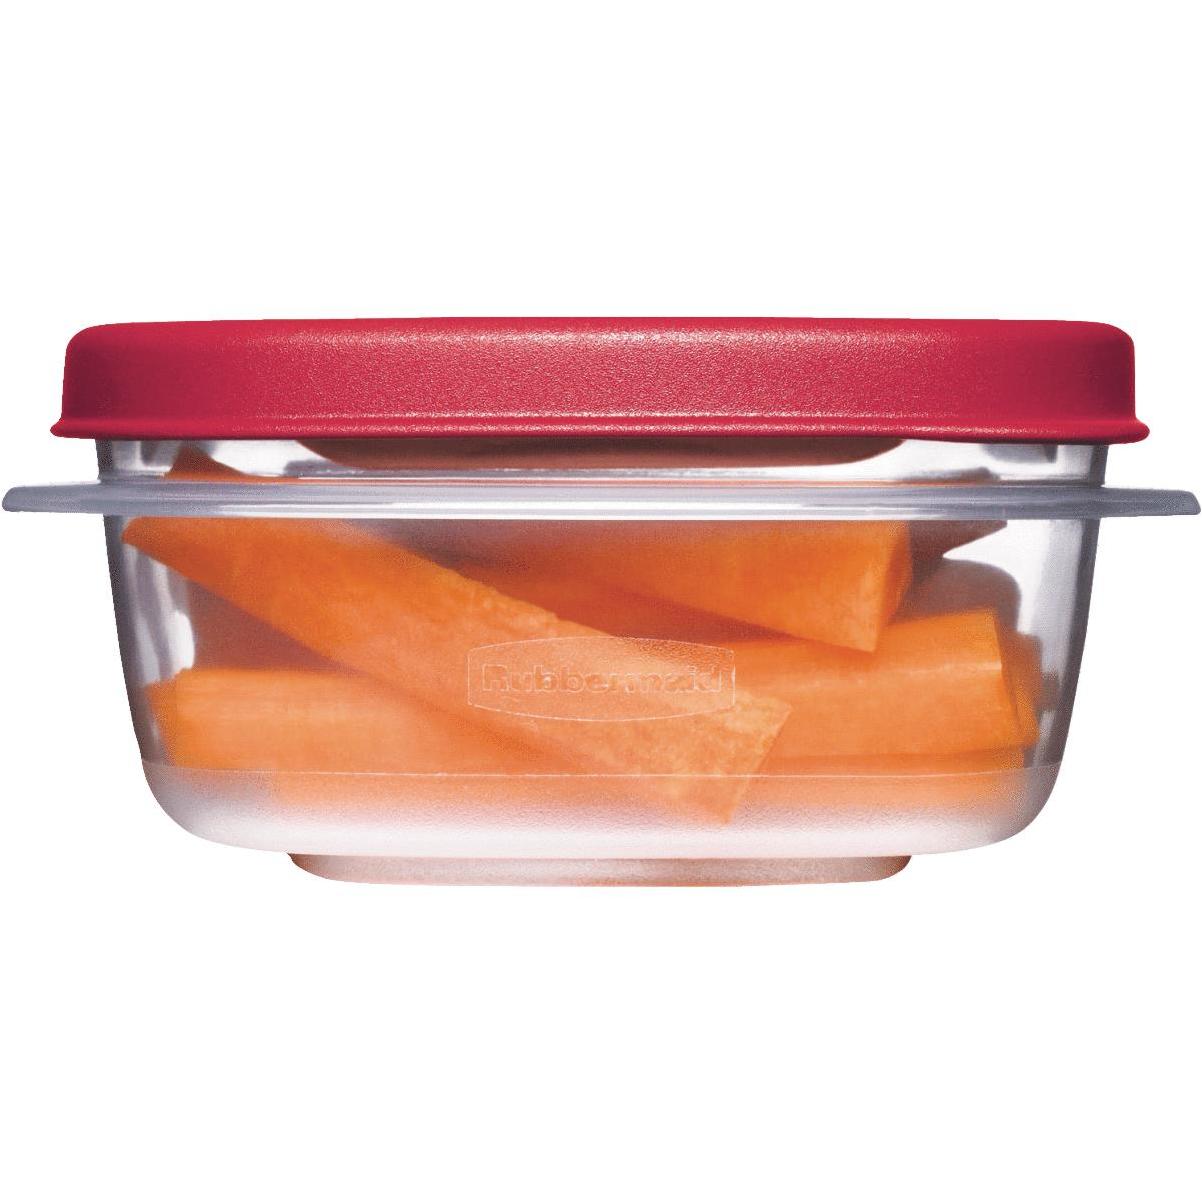 No.1777161 Rubbermaid Easy Find Lids Square Clear 